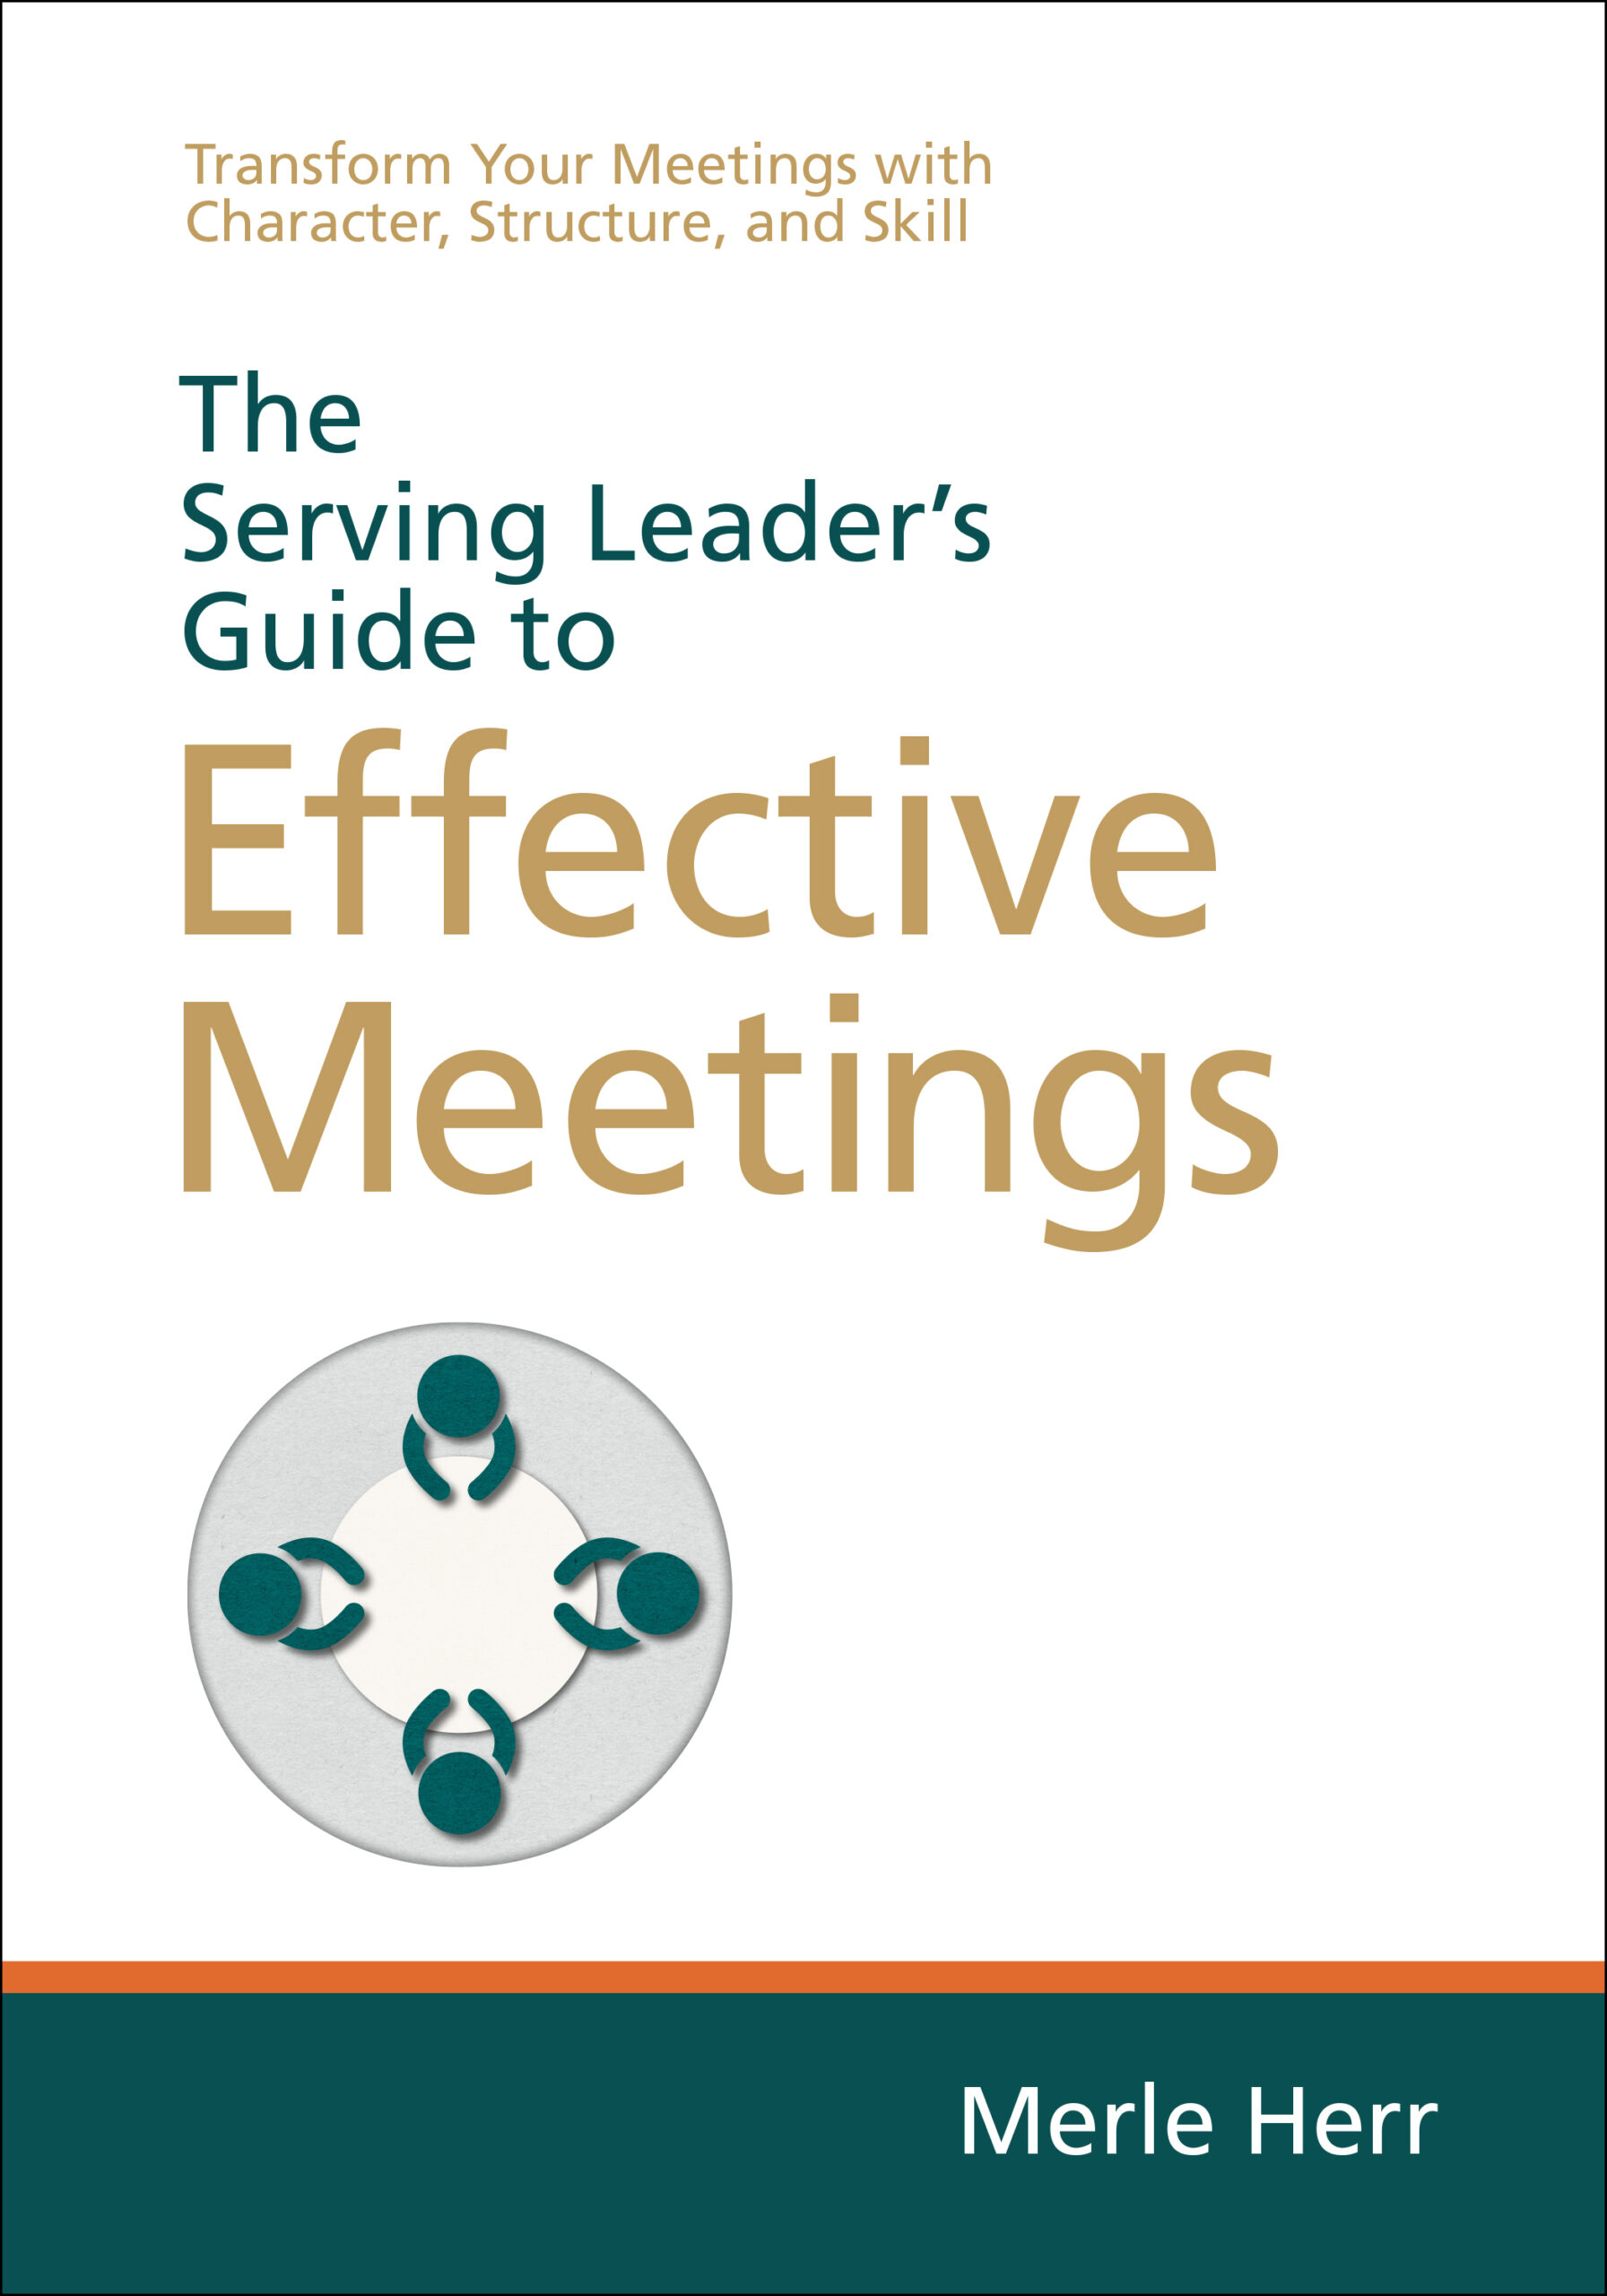 The Serving Leader’s Guide to Effective Meetings